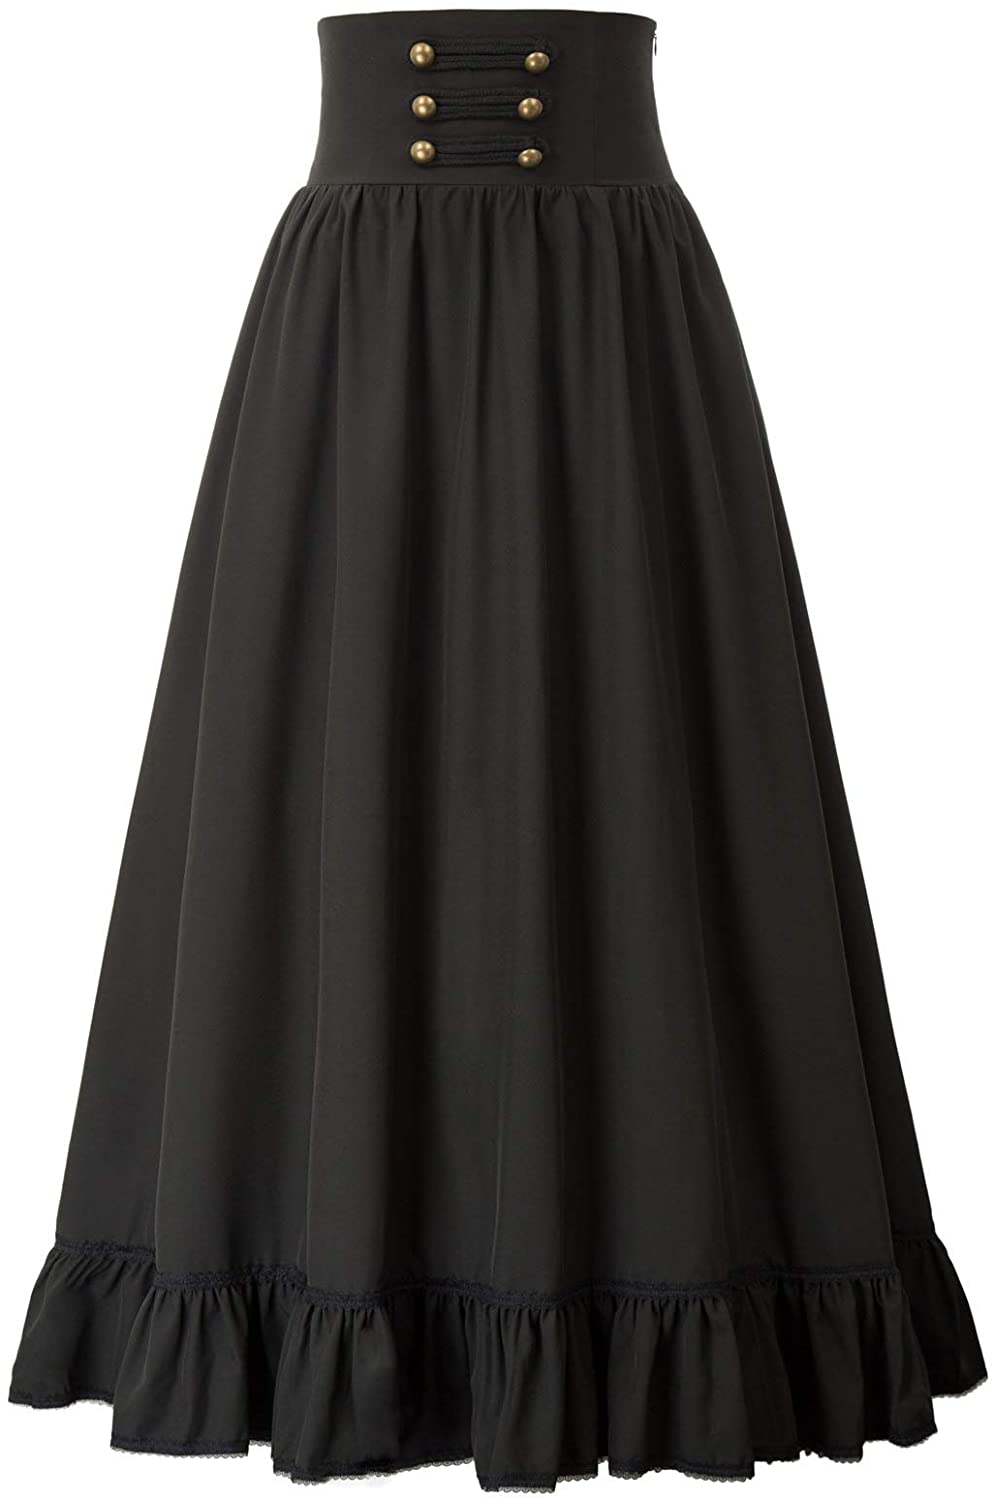 Scarlet Darkness Long Skirts for Women Double-Layer Victorian Renaissance Skirt 